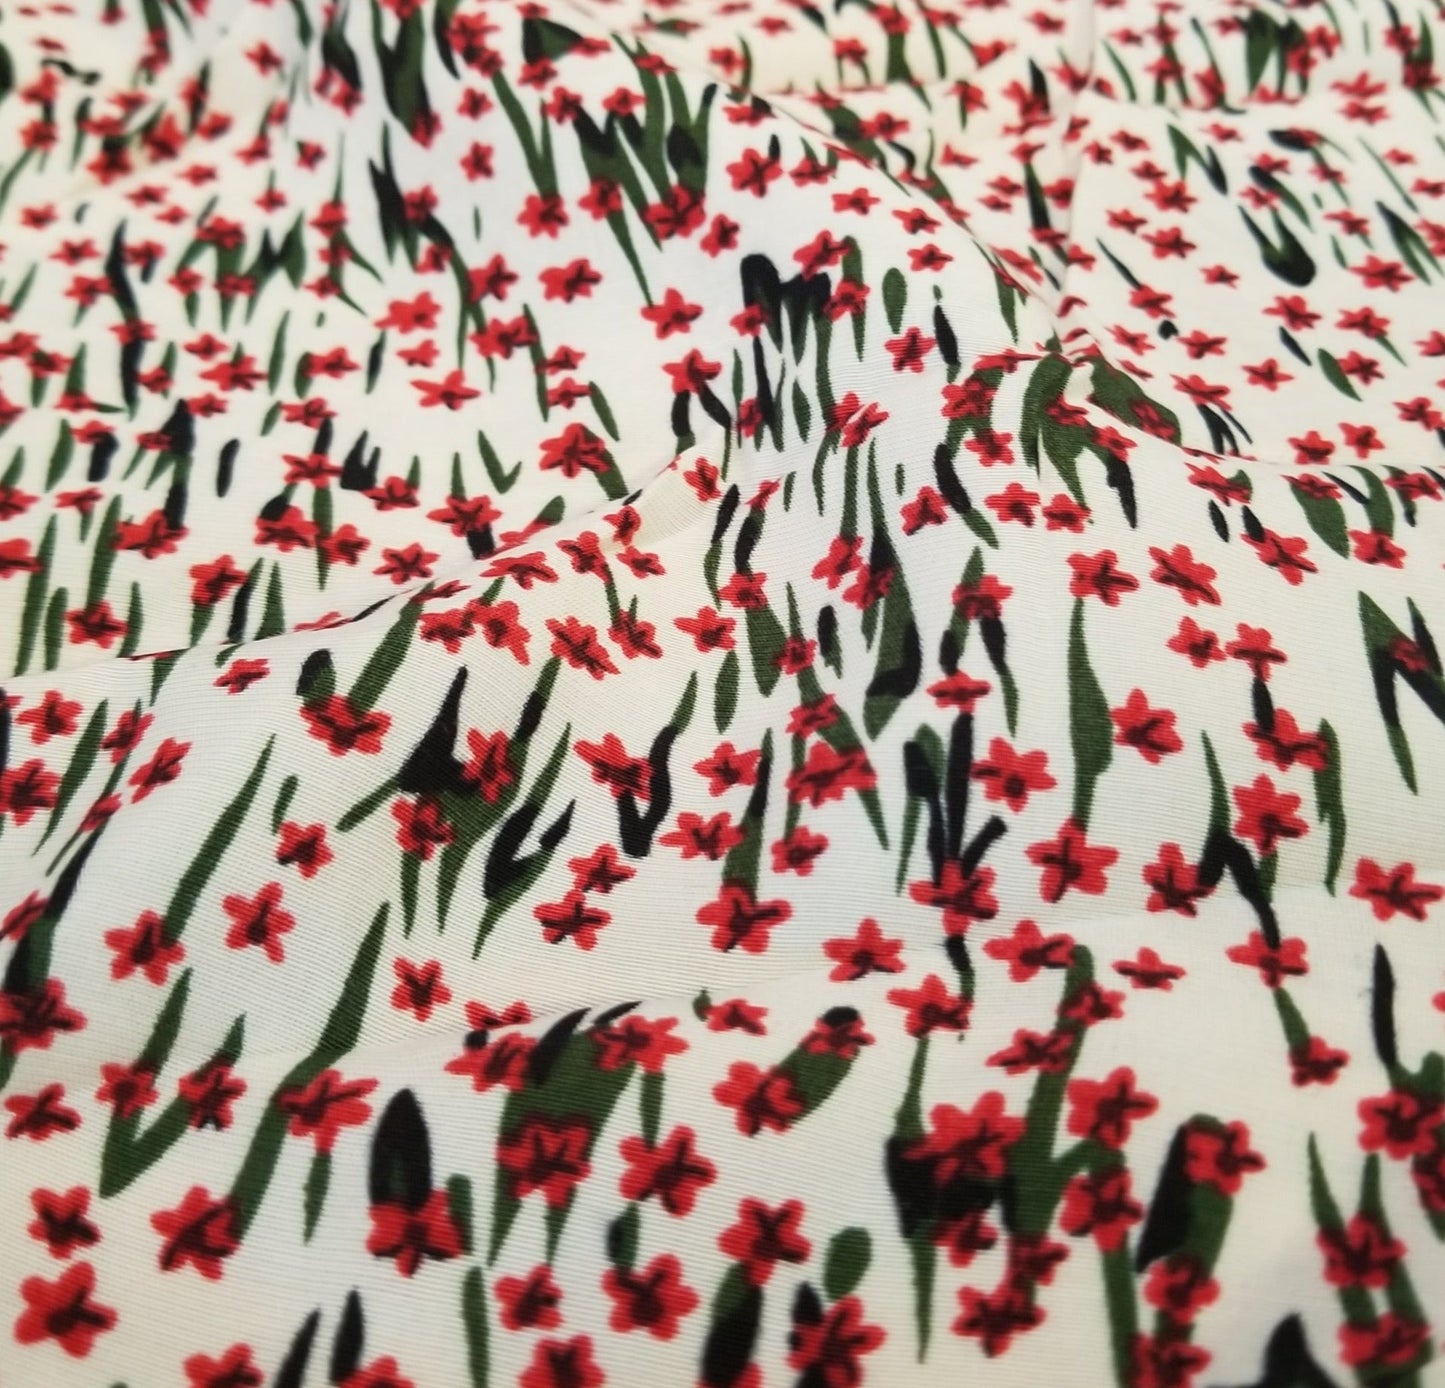 LA Finch 5 yard precut: 5 yards of Designer Deadstock Spring Ivory and Red Flower Fields Rayon Woven